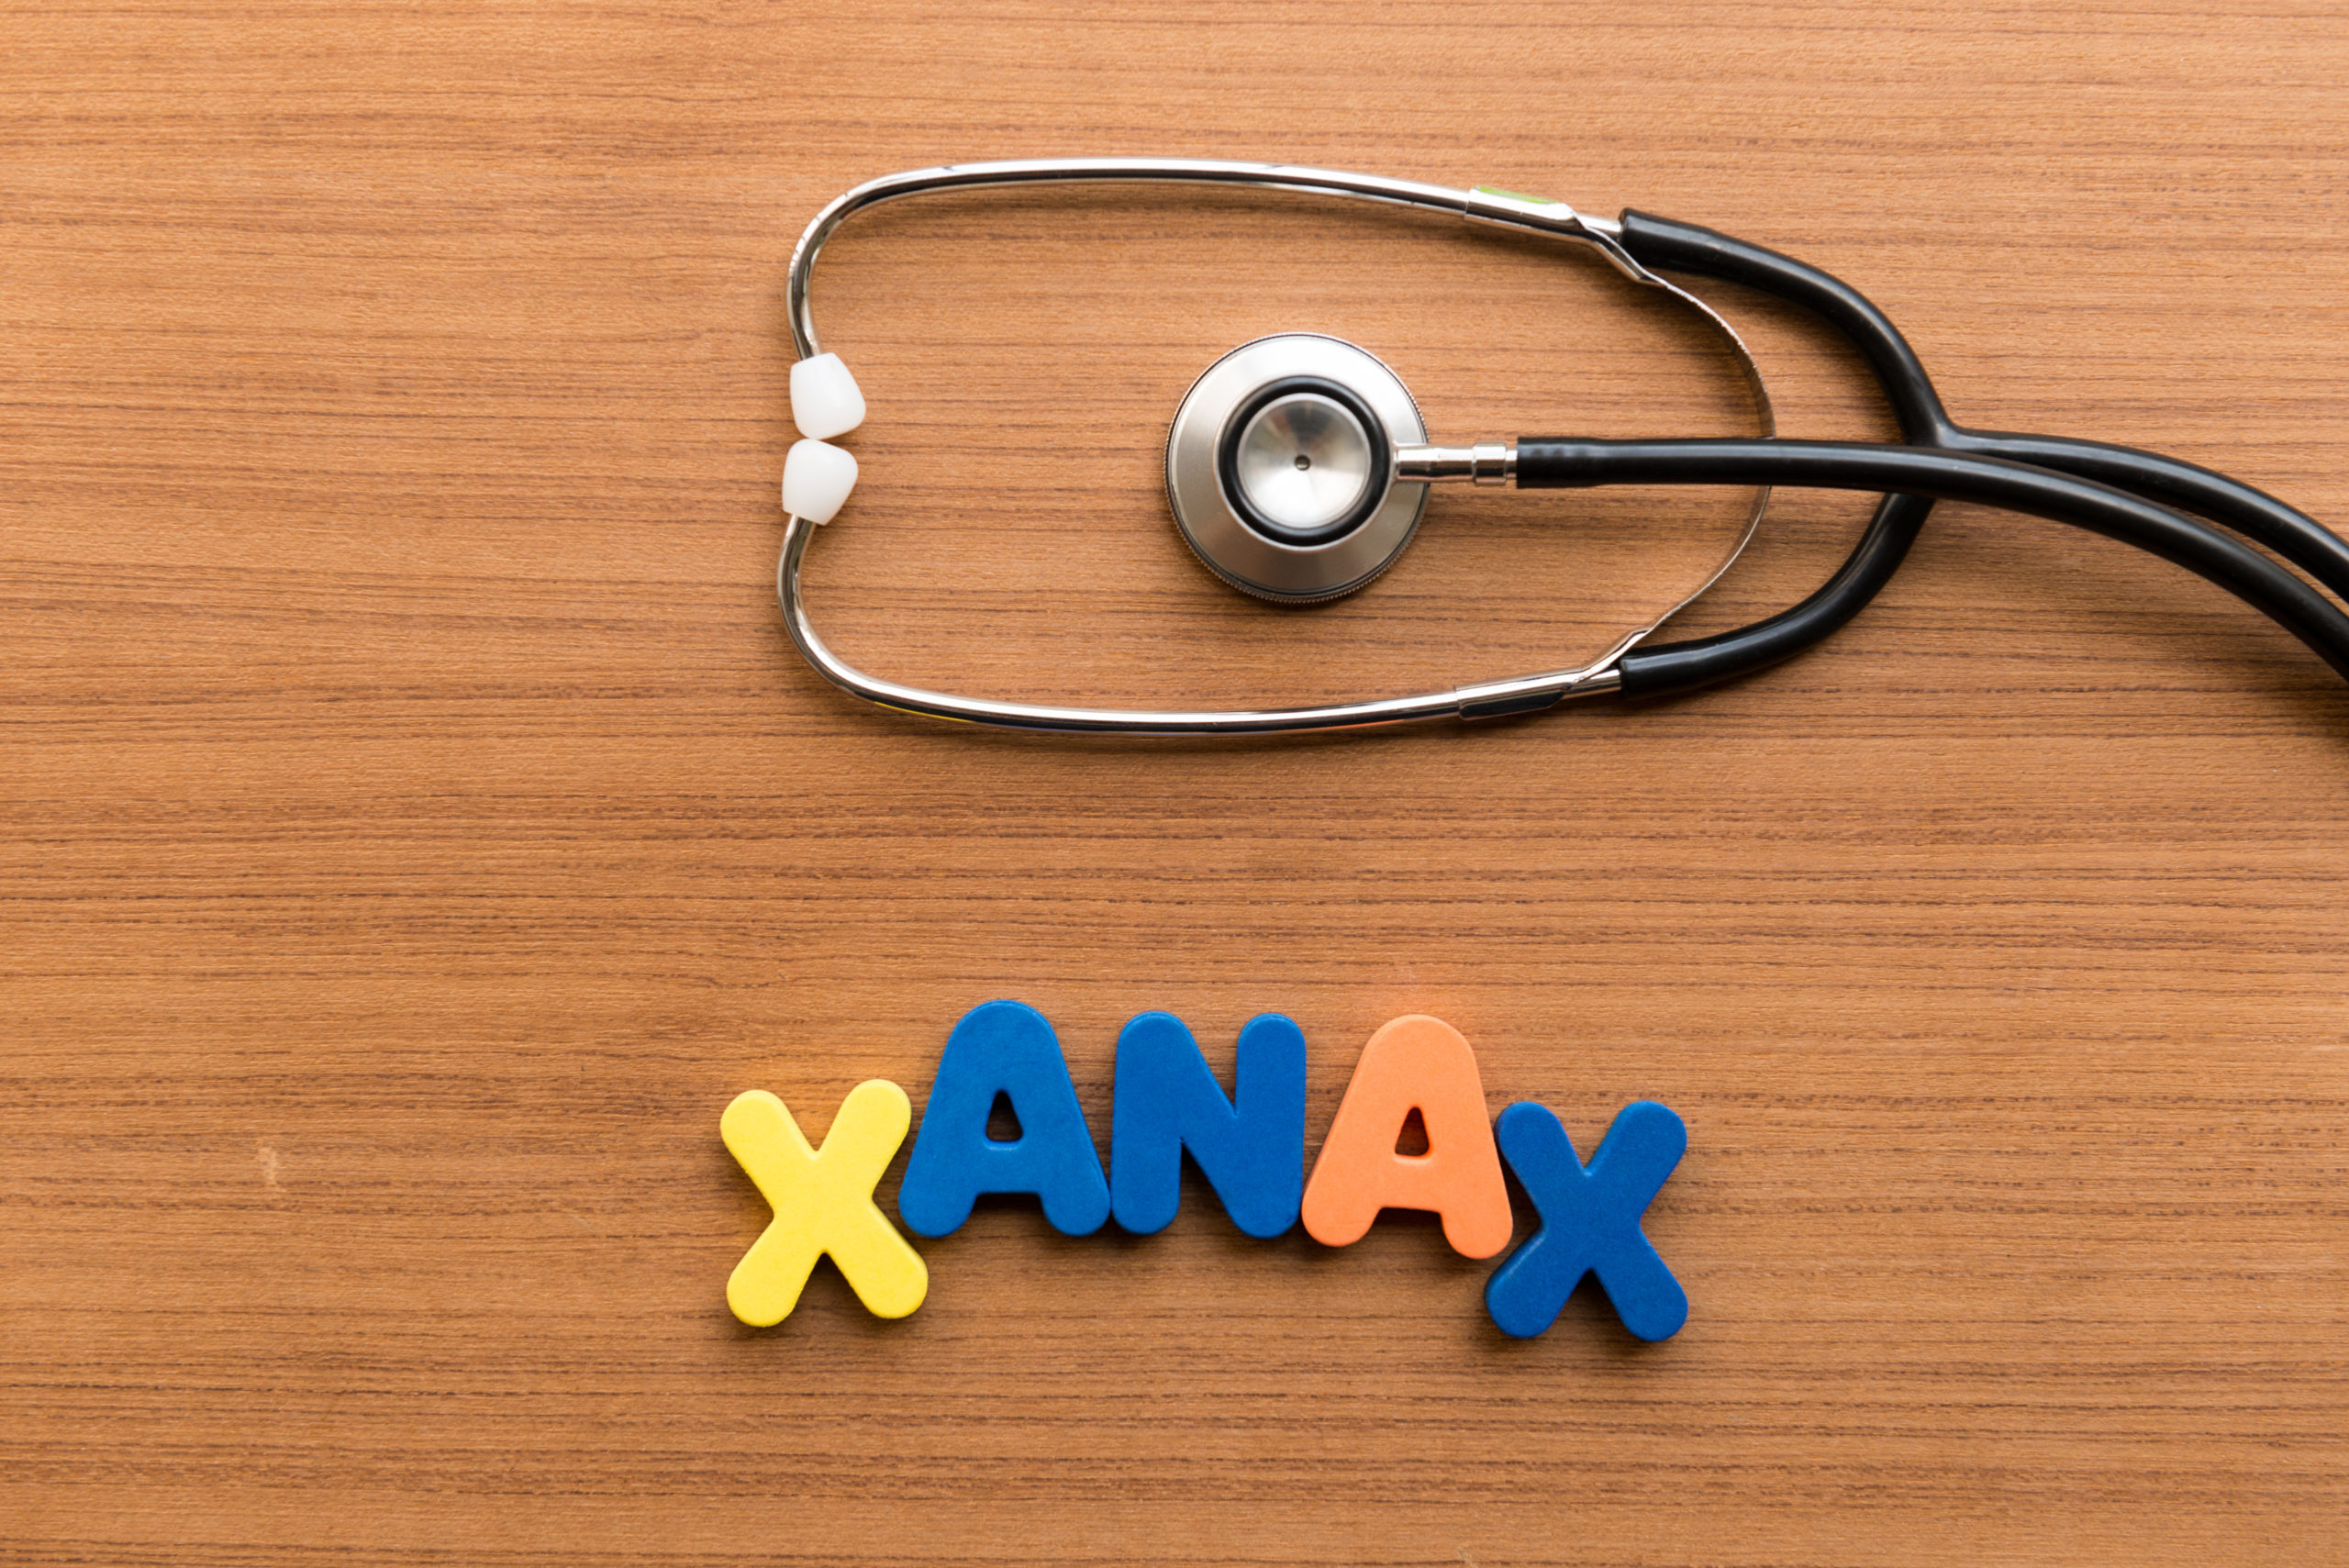 Is There Rehab for Xanax Addiction?